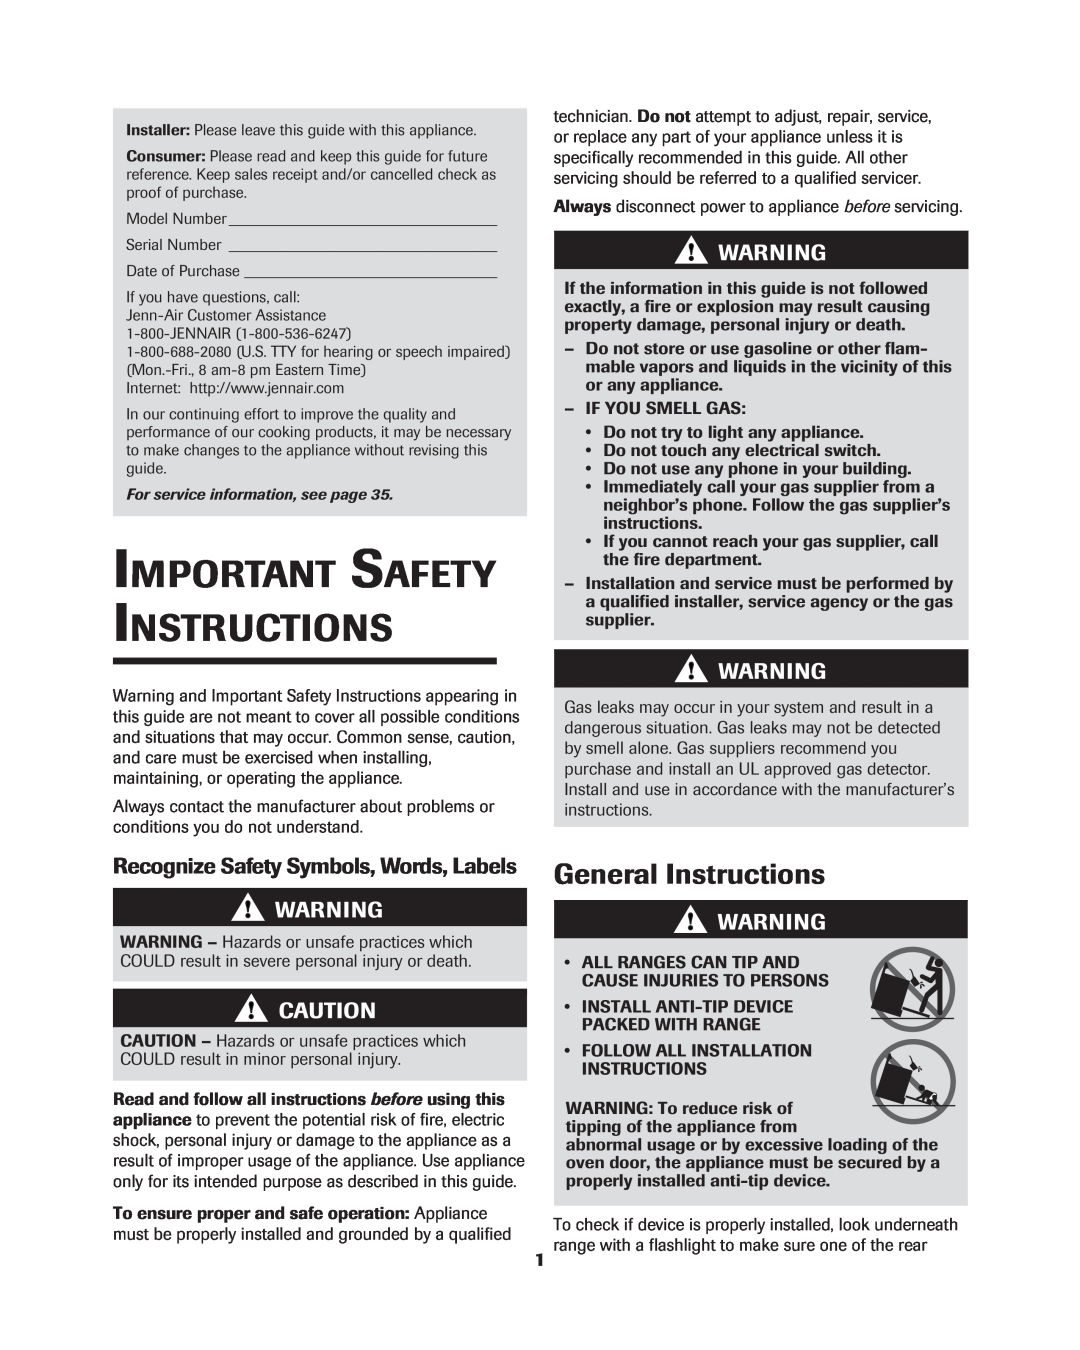 Jenn-Air 8113P754-60 General Instructions, Recognize Safety Symbols, Words, Labels, Important Safety Instructions 